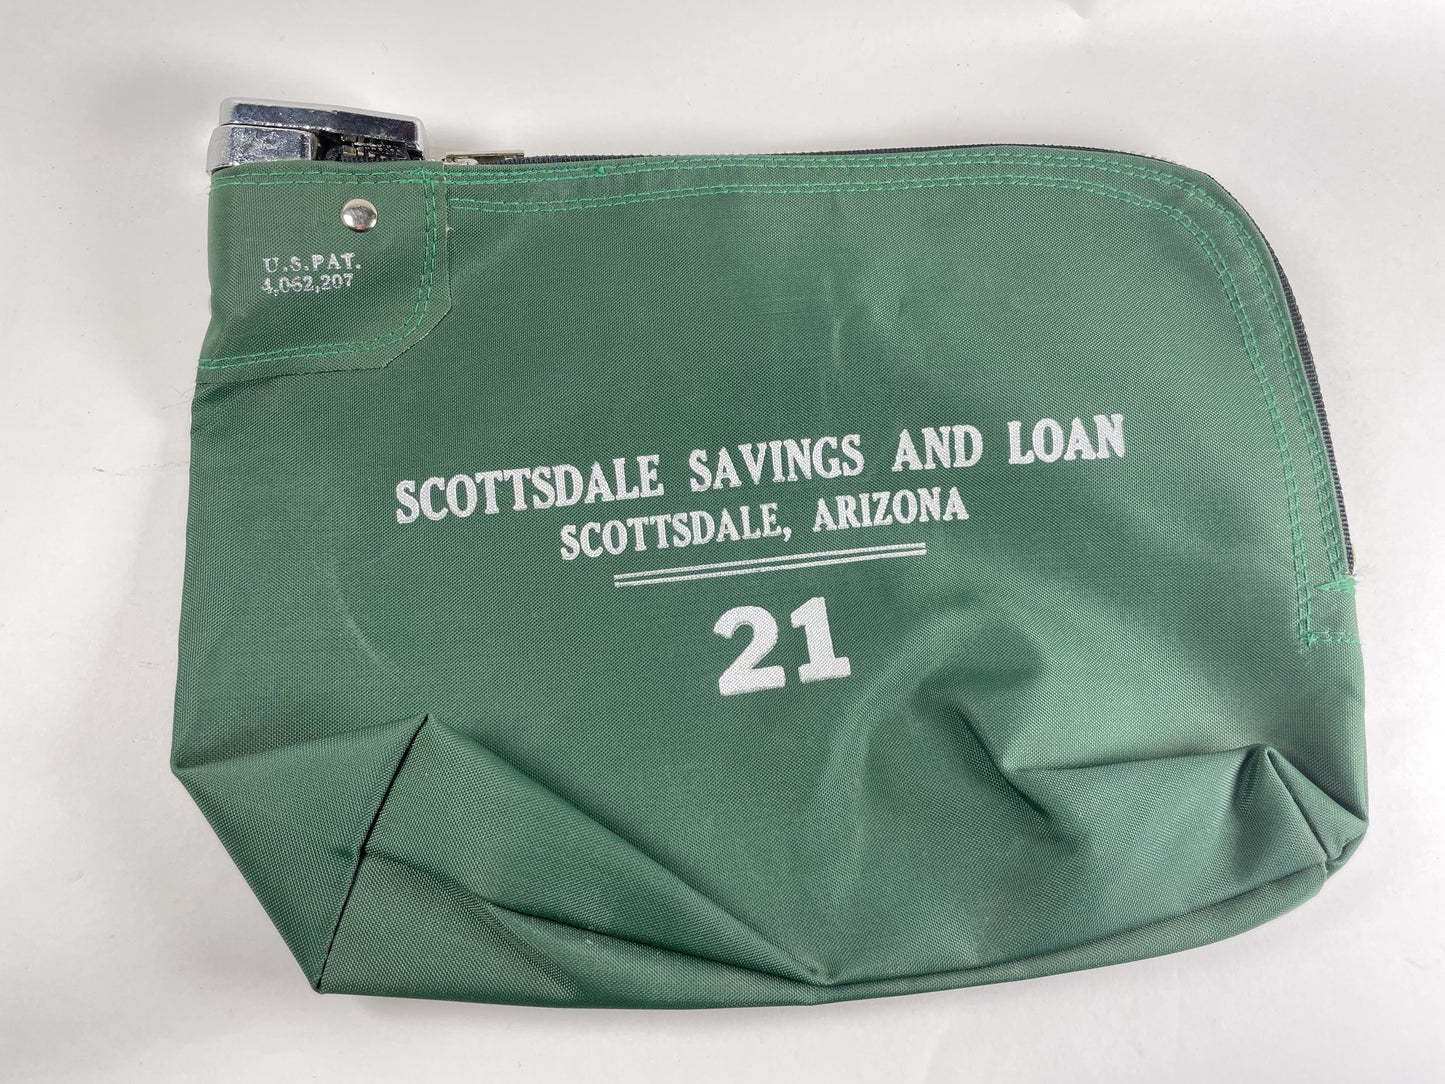 Scottsdale Savings and Loan New Old Stock Vintage Money Bag With Key